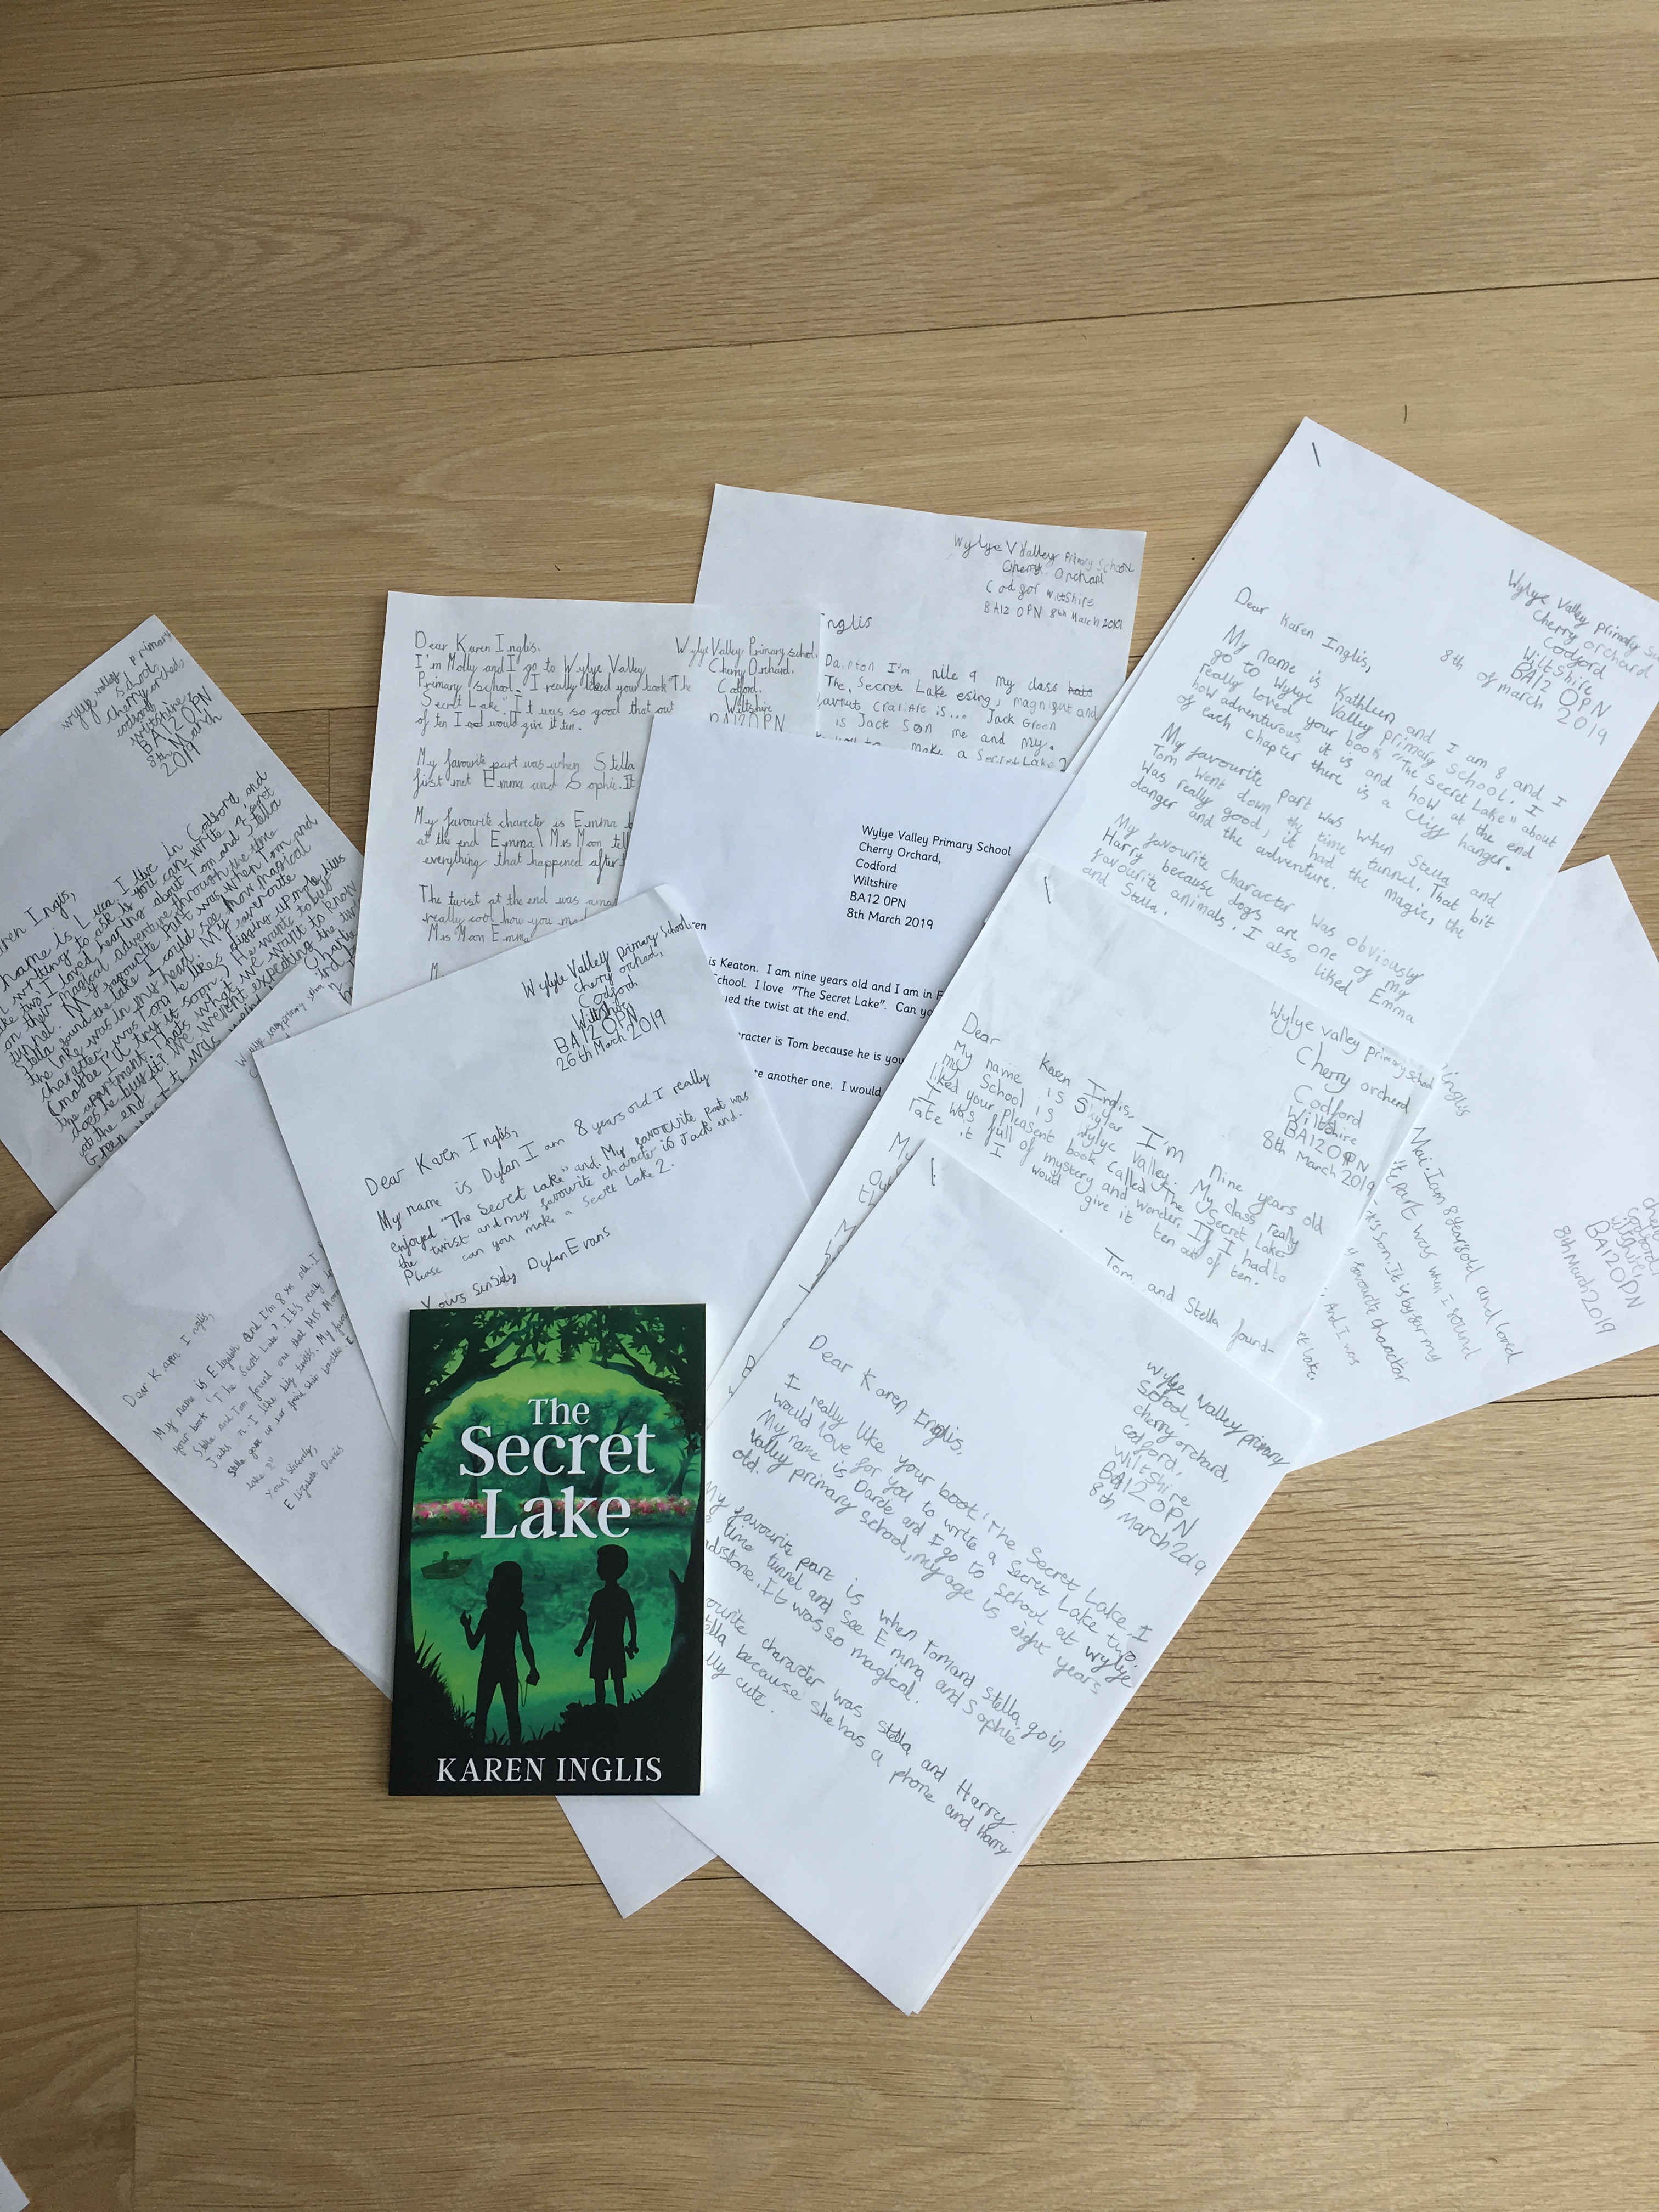 hand written letters arranged with a copy of The Secret Lake children's book